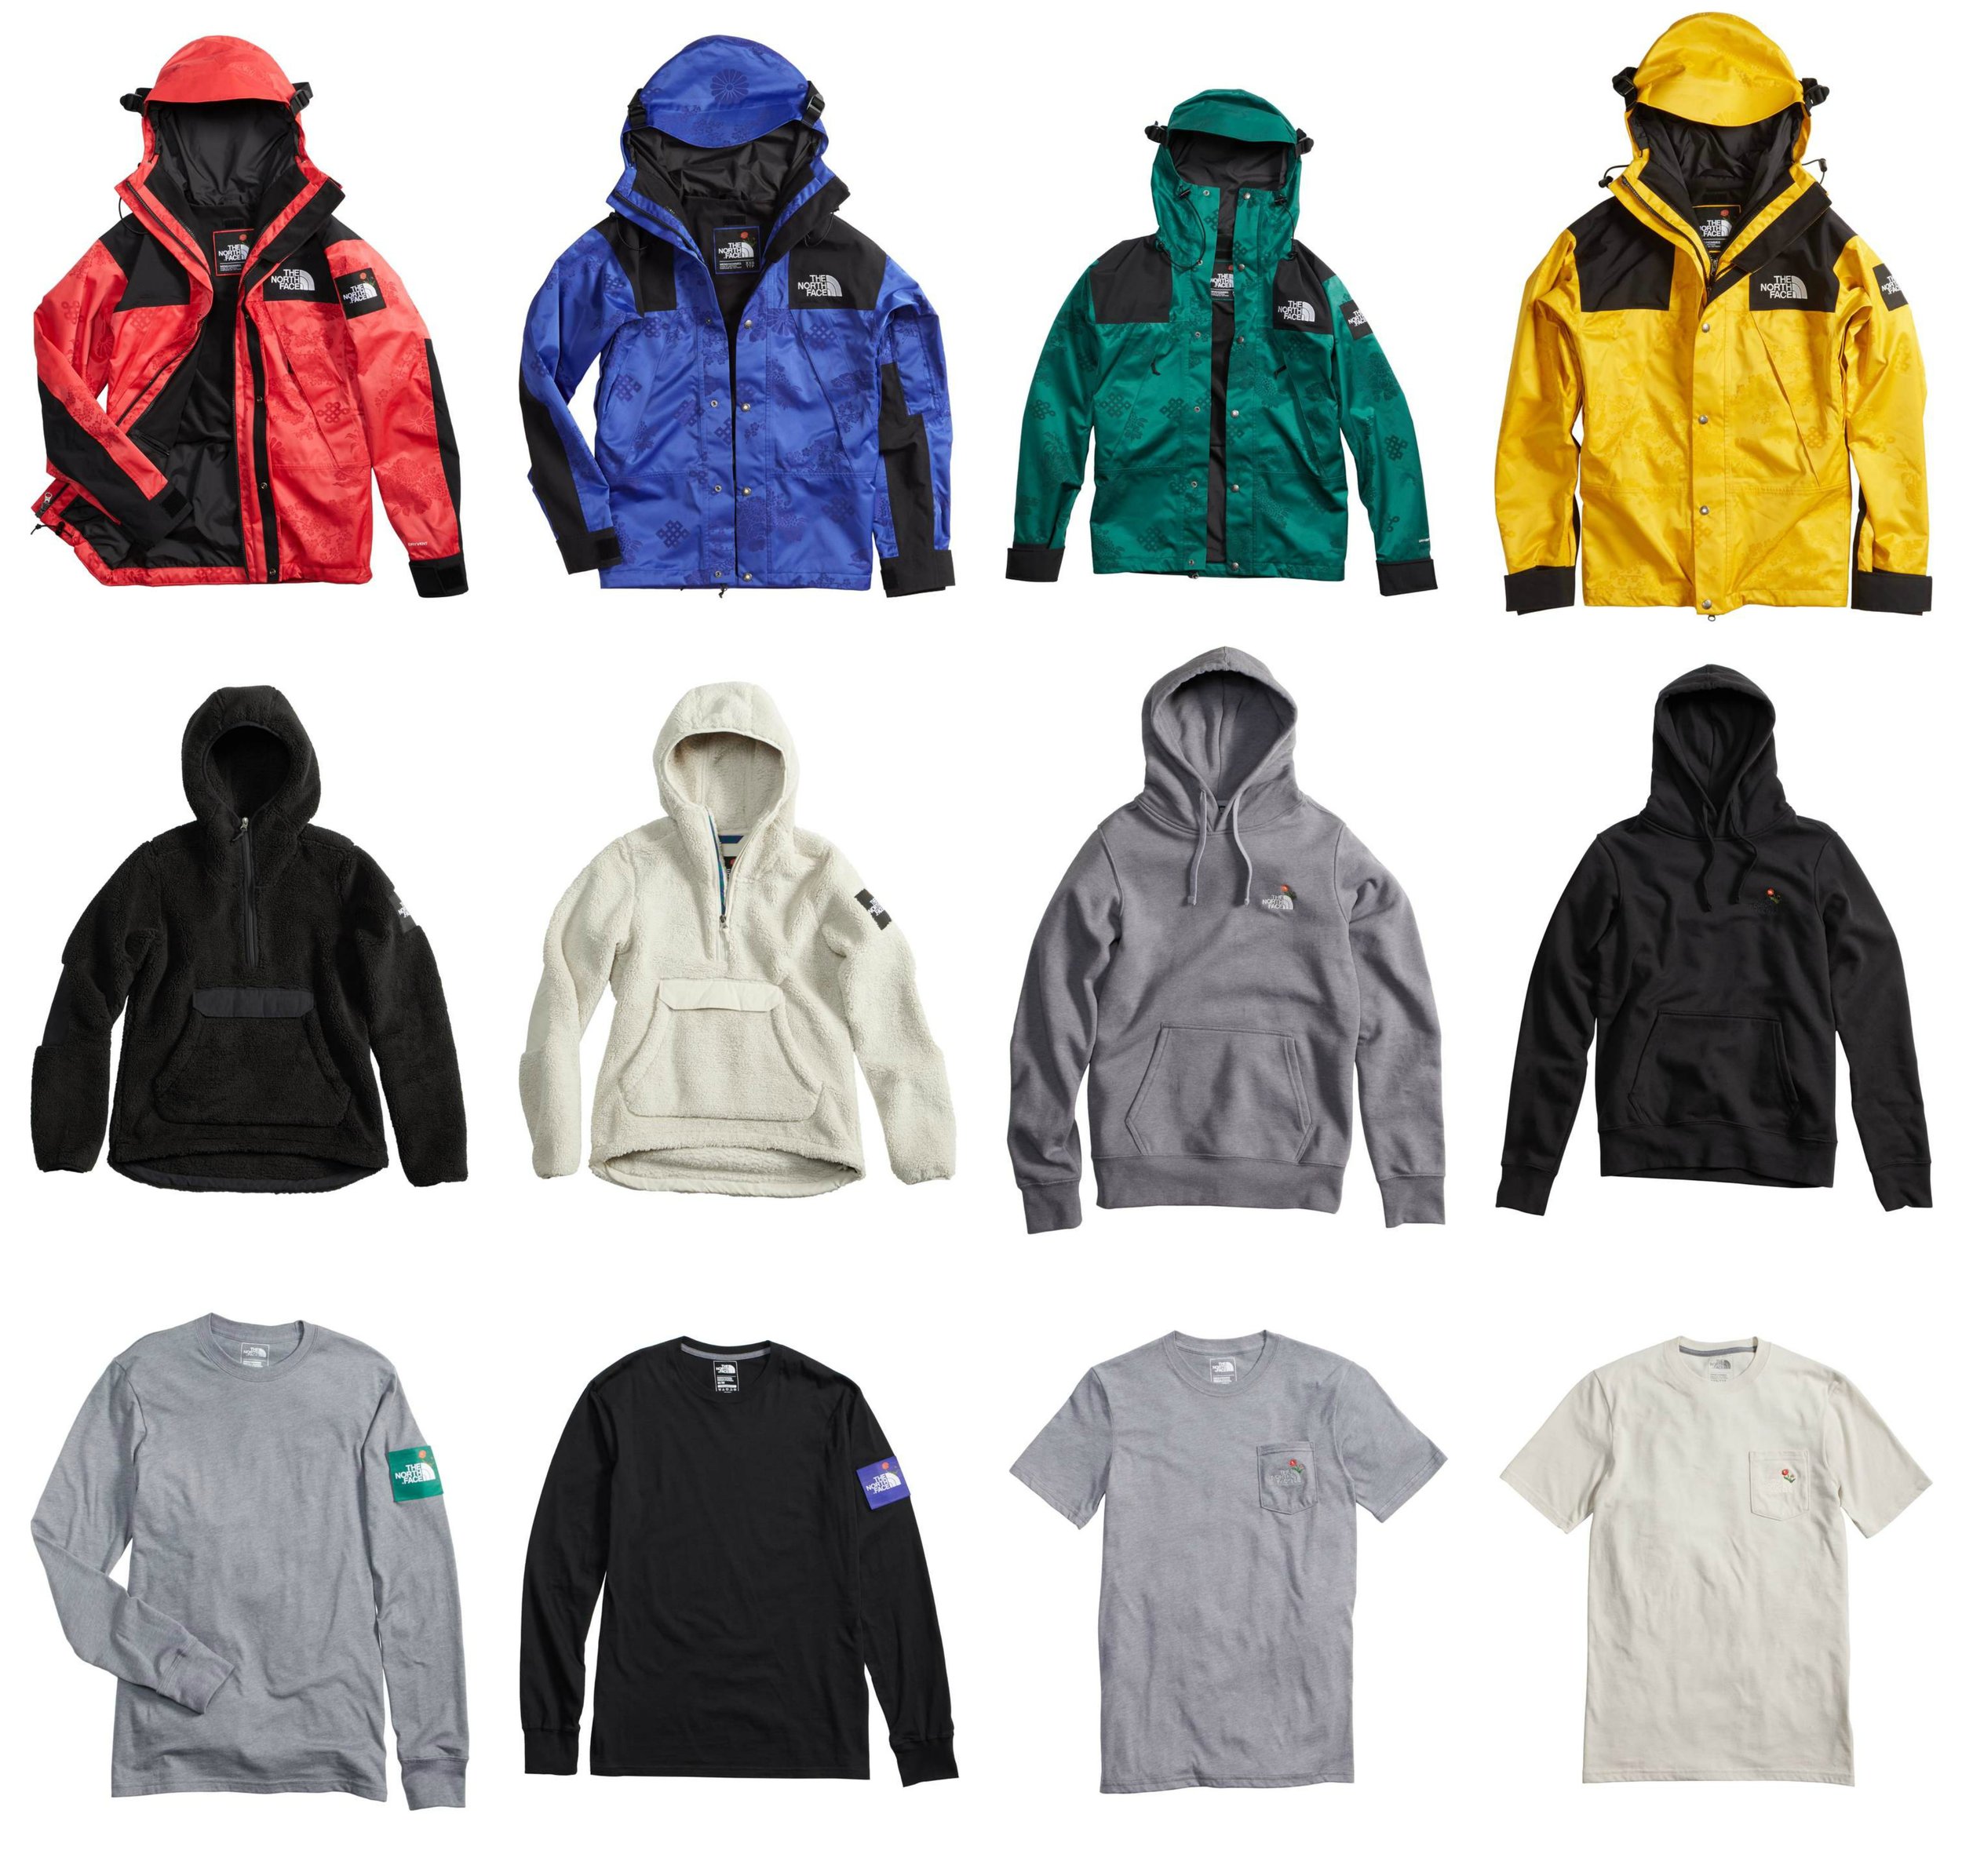 Nordstrom x The North Face Collection 